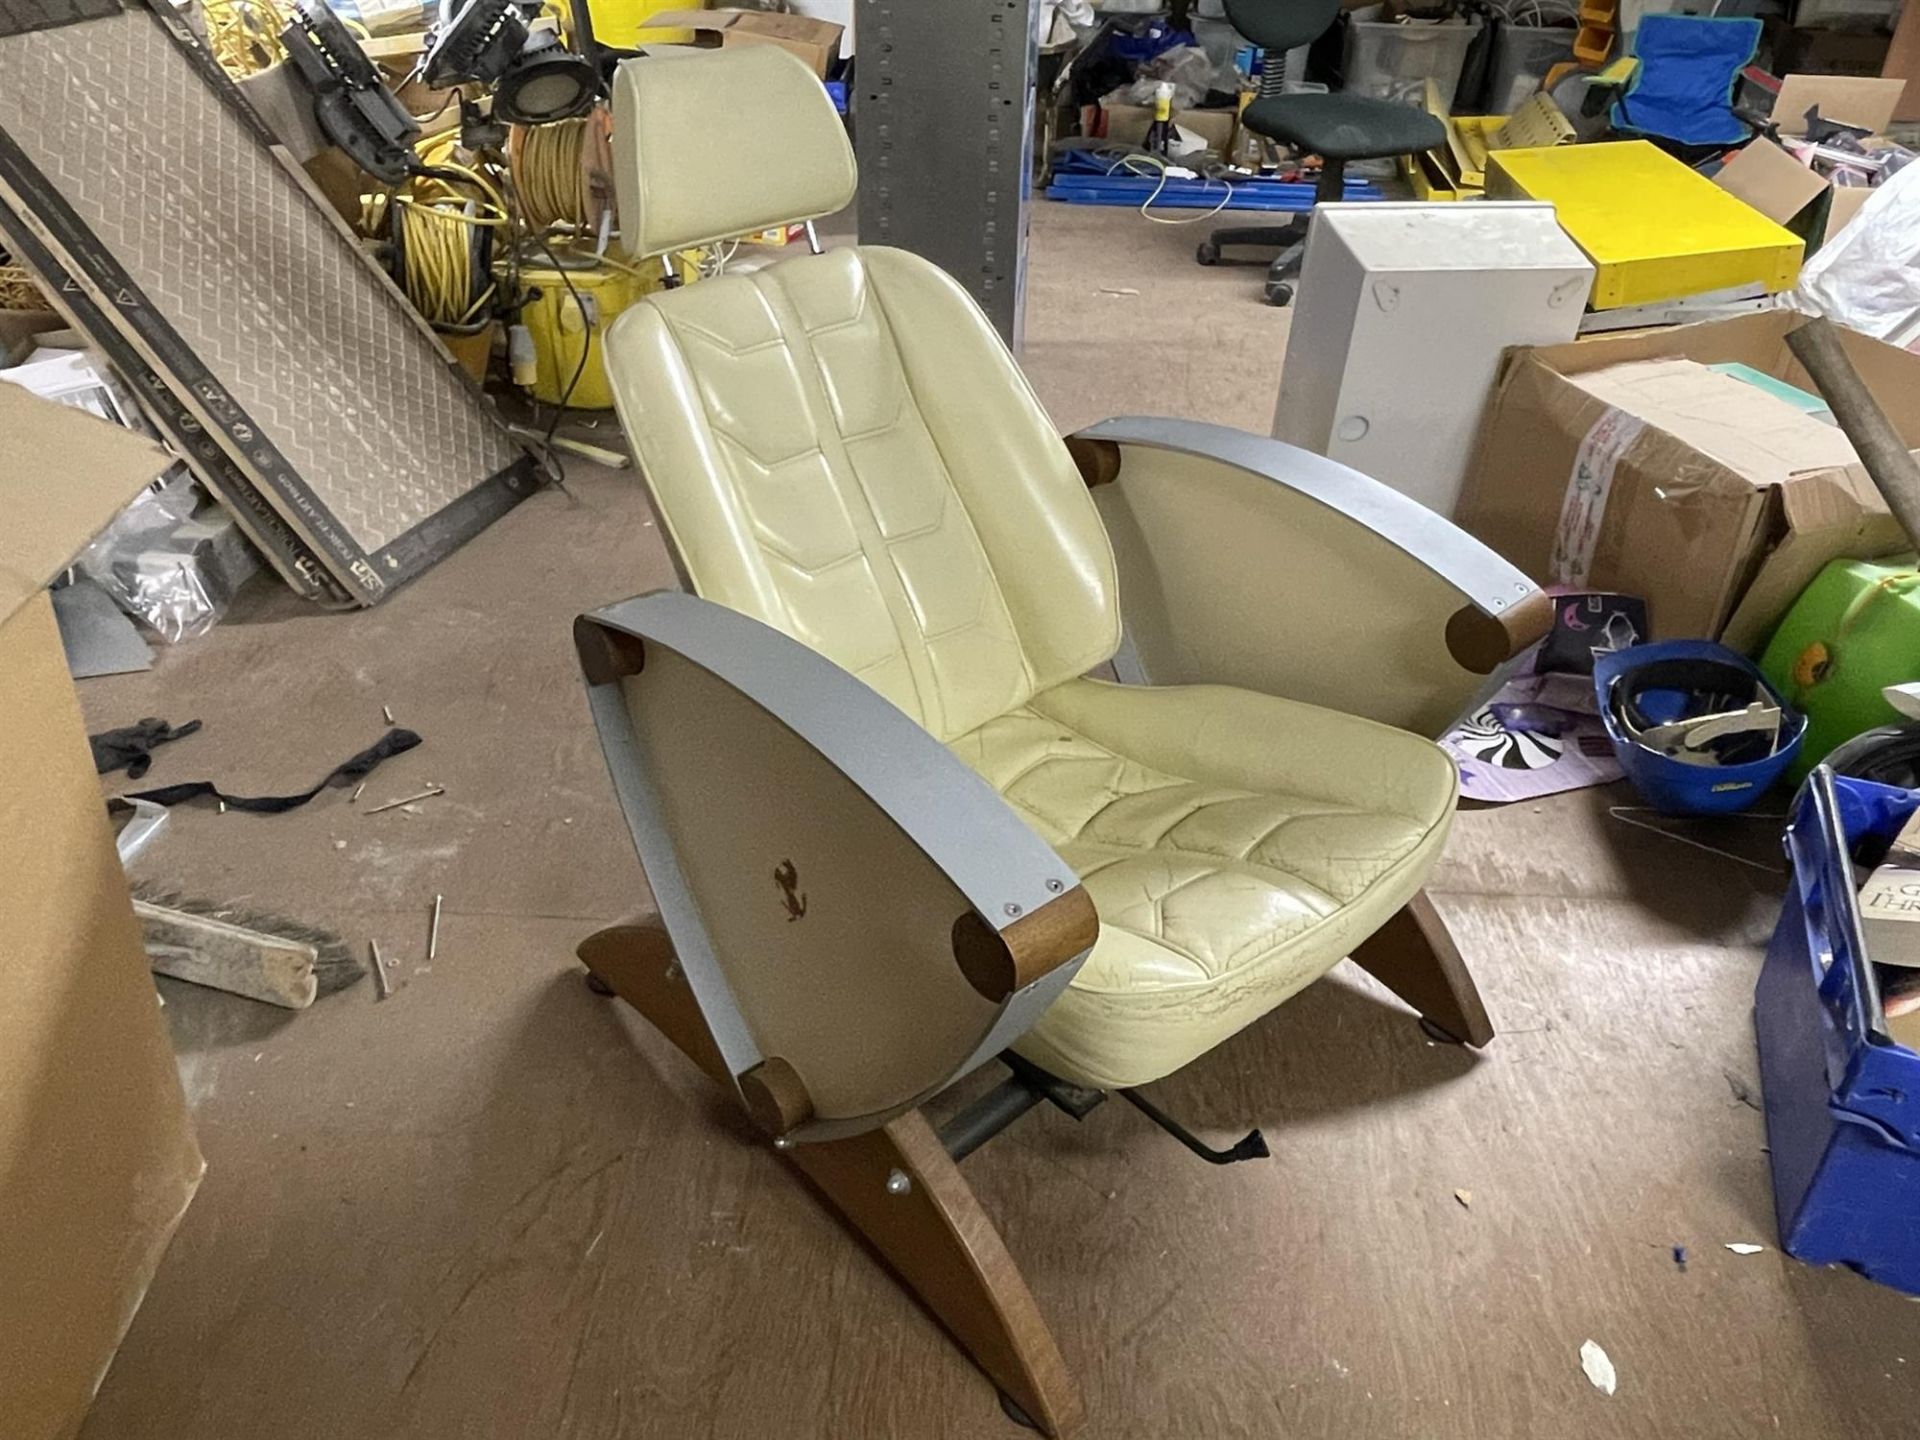 Pair of Ferrari 308 Crema Leather Seats on Substantial Bases - Image 5 of 10